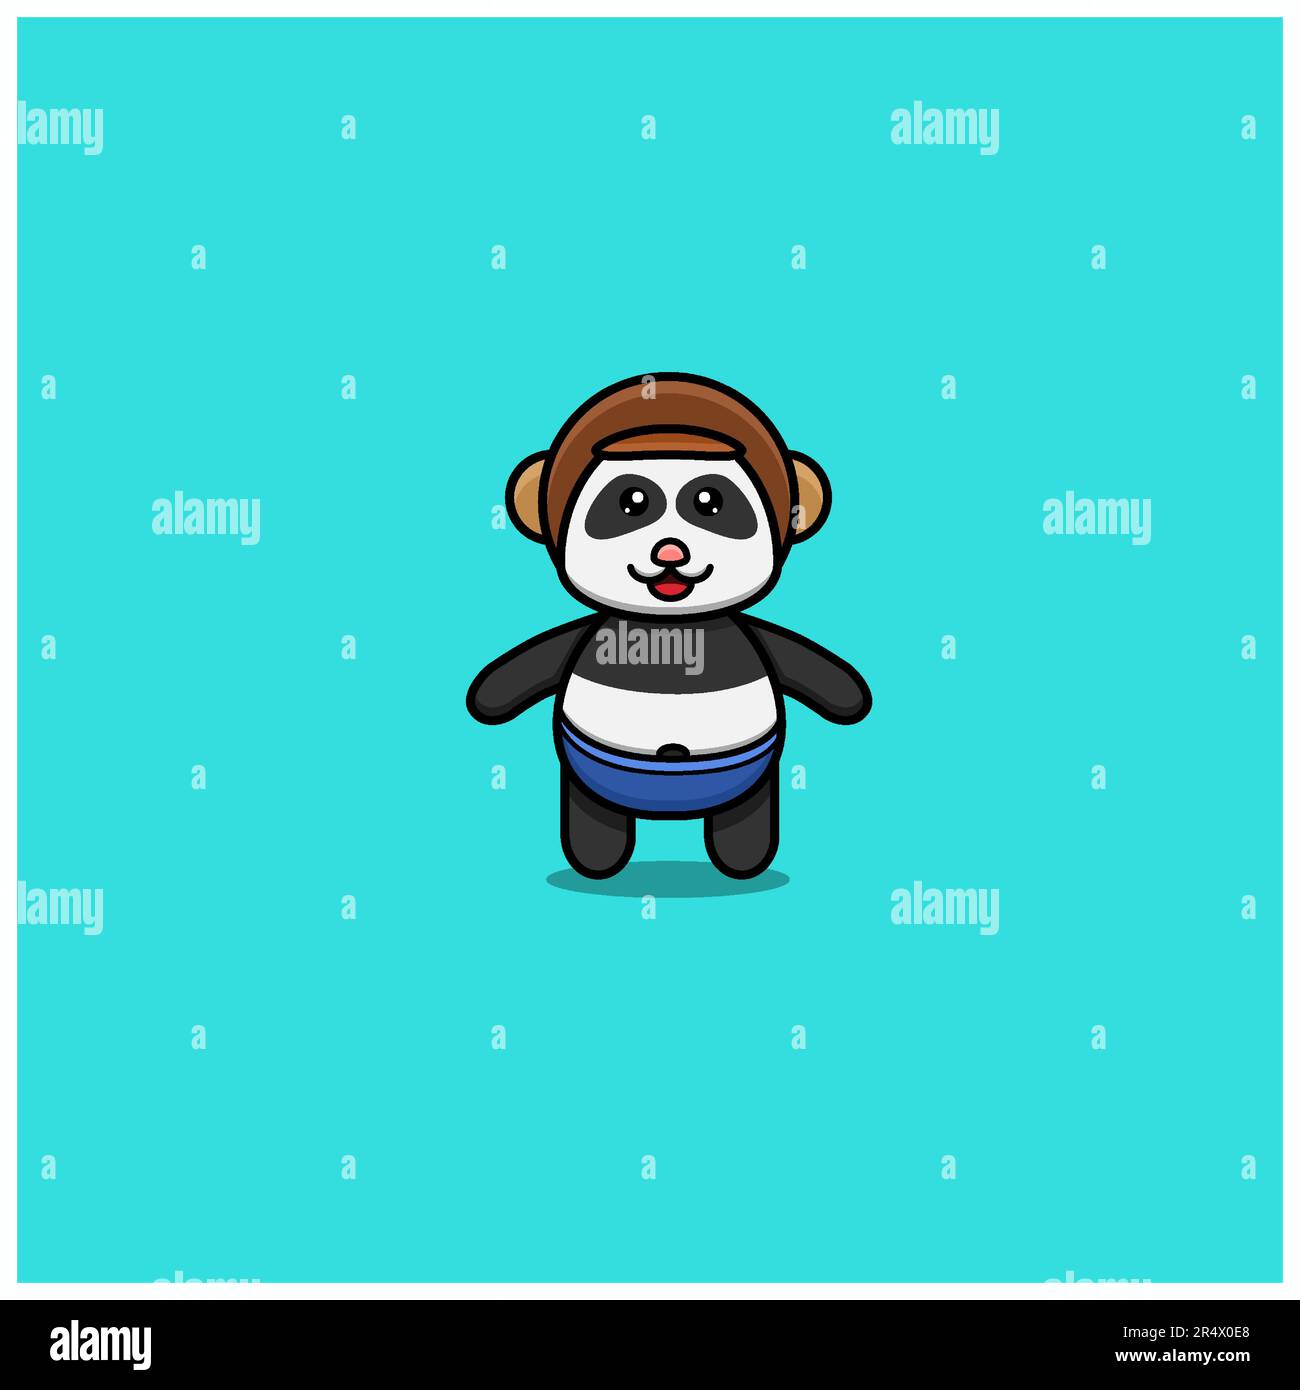 Cute Baby Panda Wearing Helmet. Character, Logo, Icon And Inspiration ...